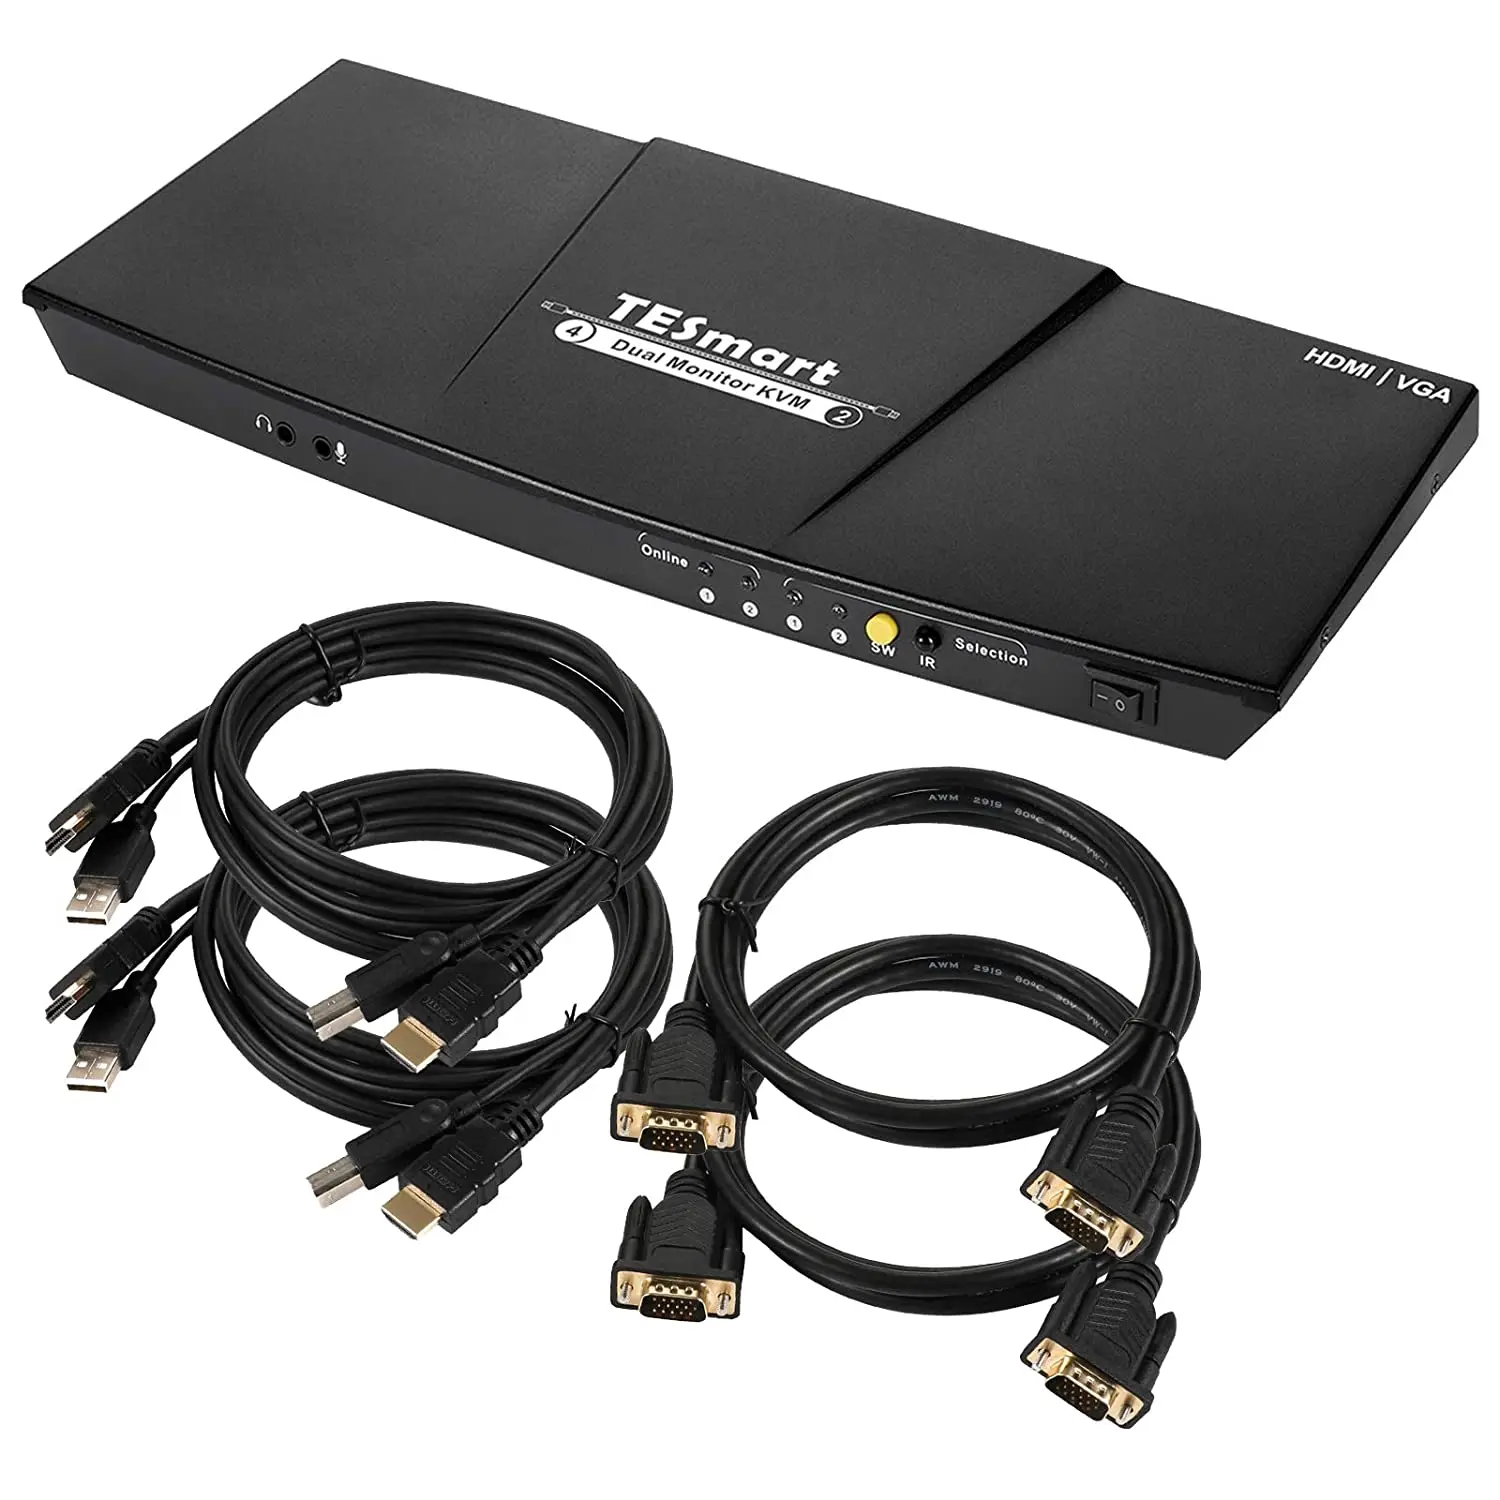 TESmart Dual-Monitor-KVM-Switch-2 Port (2 HDMI Ports and 2 VGA Ports) Updated 4K@60Hz KVM Switch HDMI with Remote Microphone and